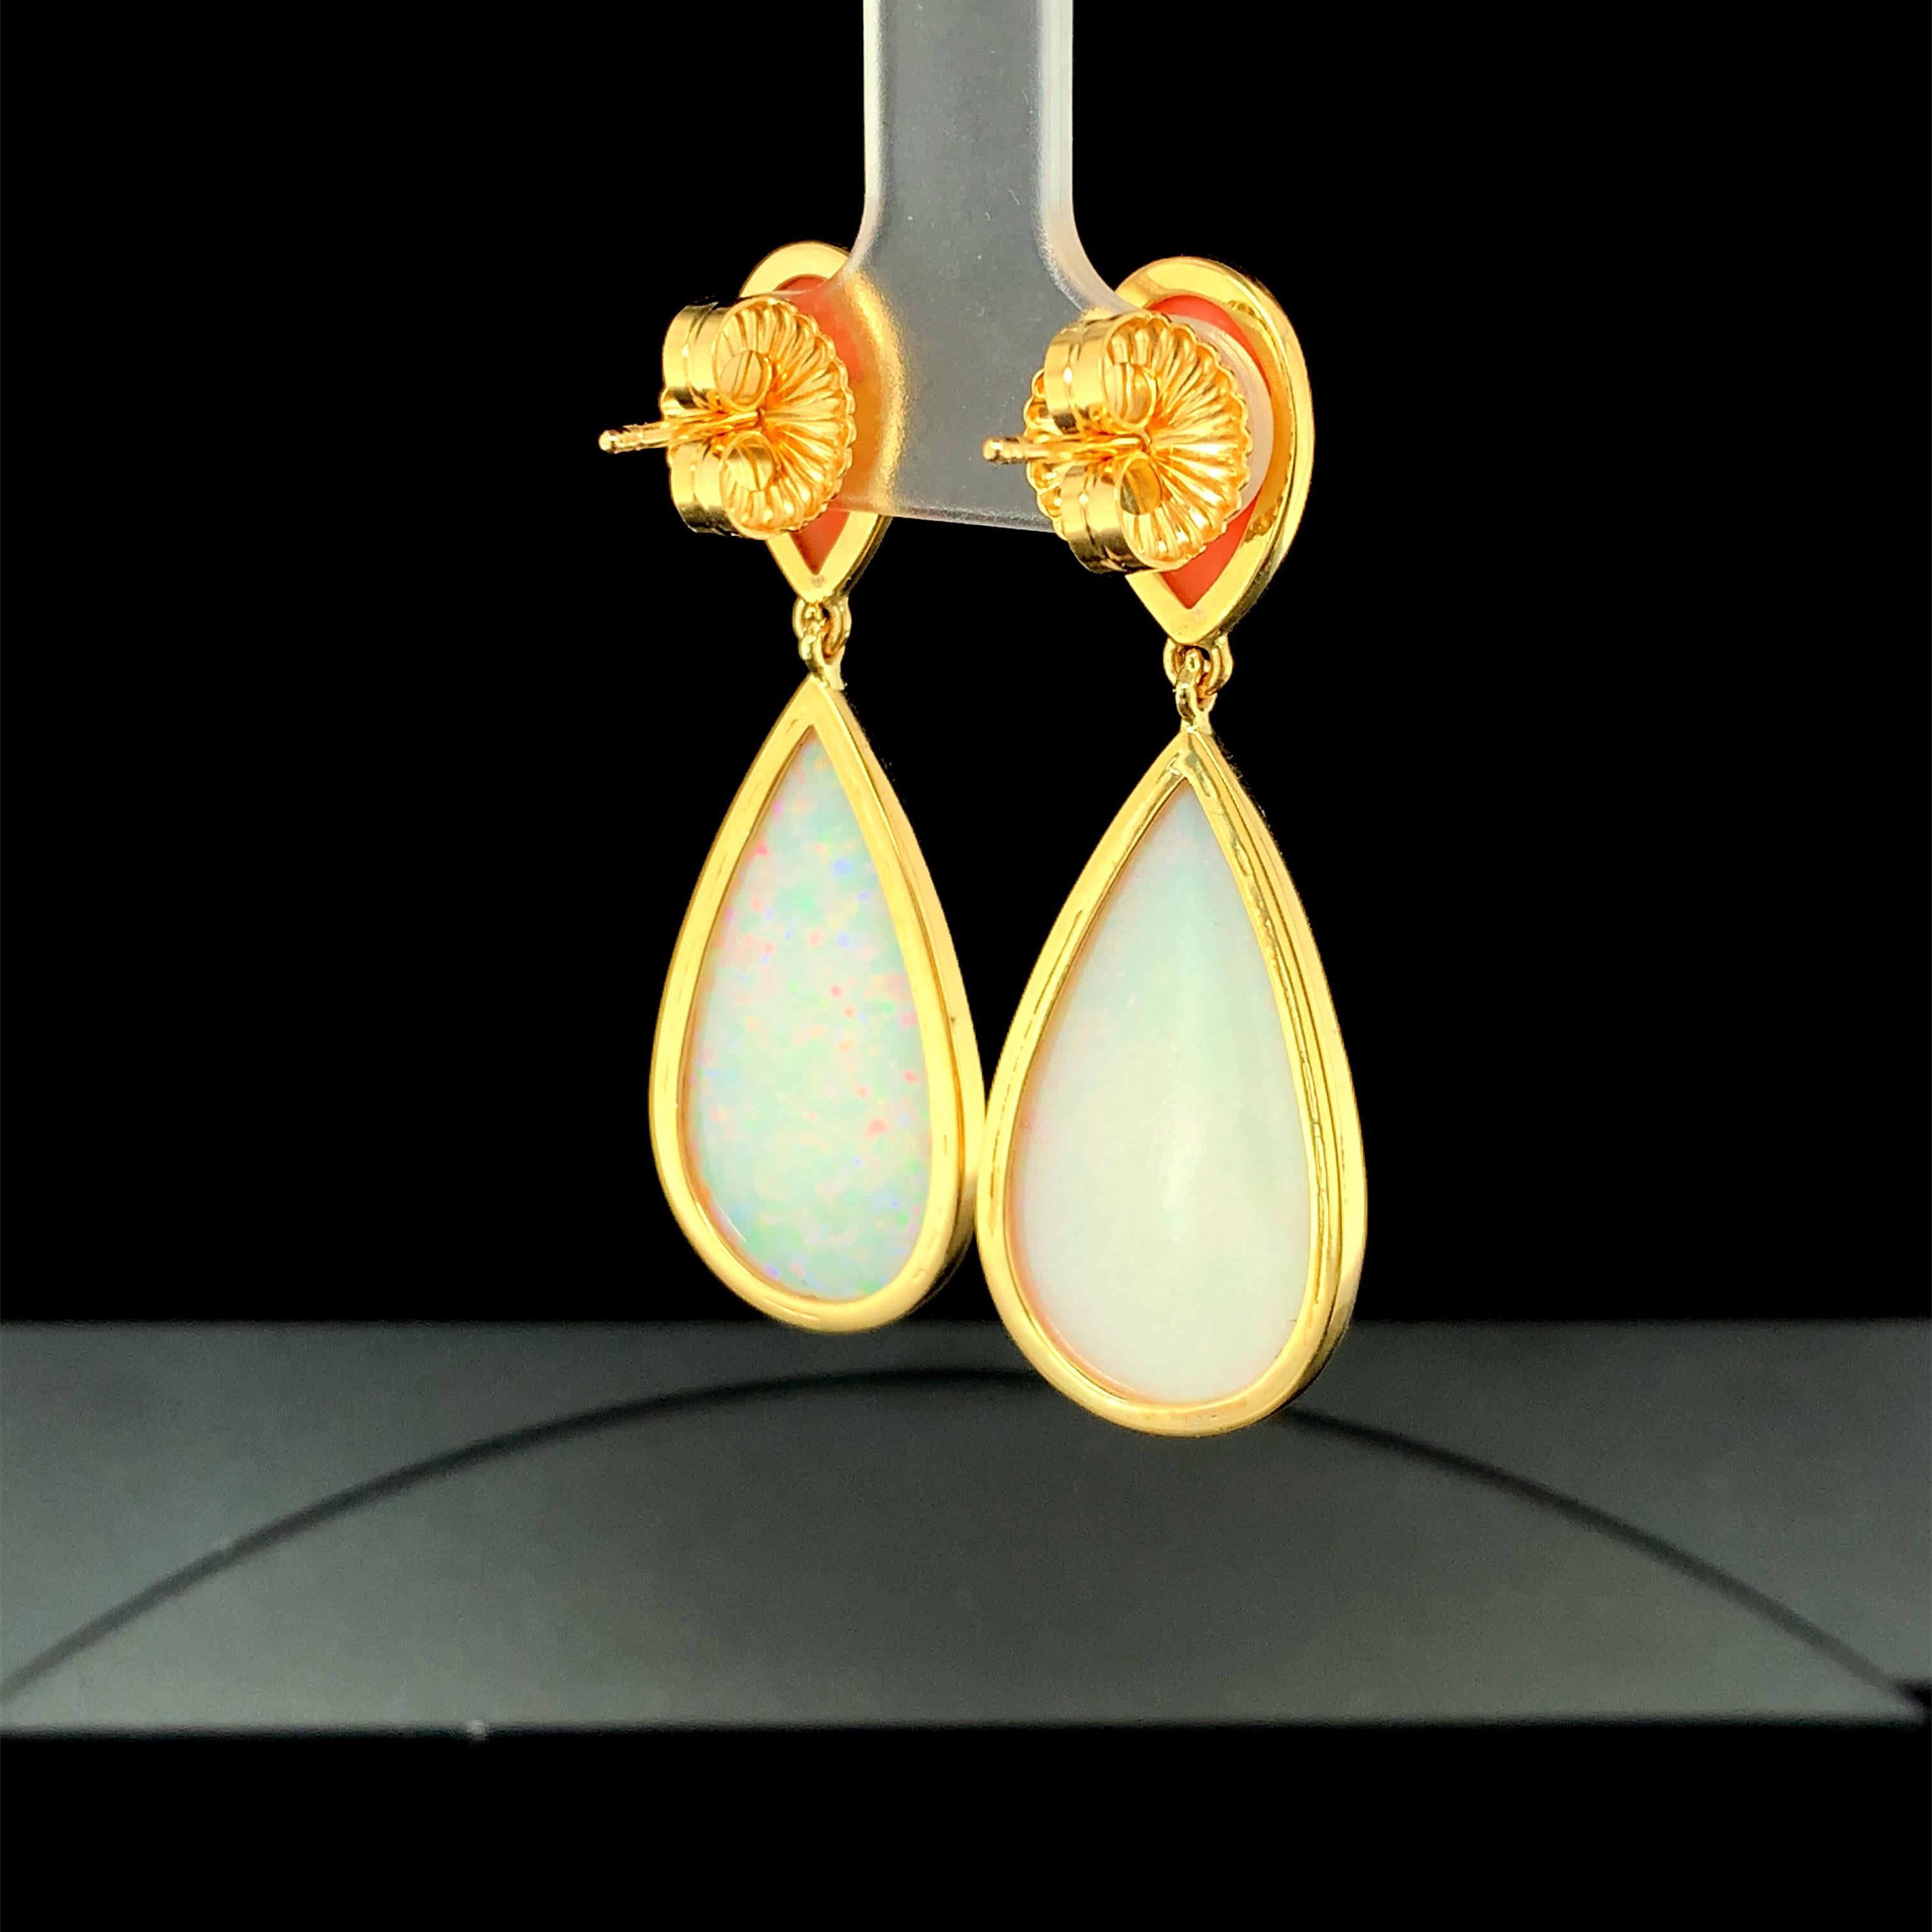 Artisan Pear-Shaped Opal and Coral Drop Earrings in Yellow Gold, 17.75 Carats Total For Sale